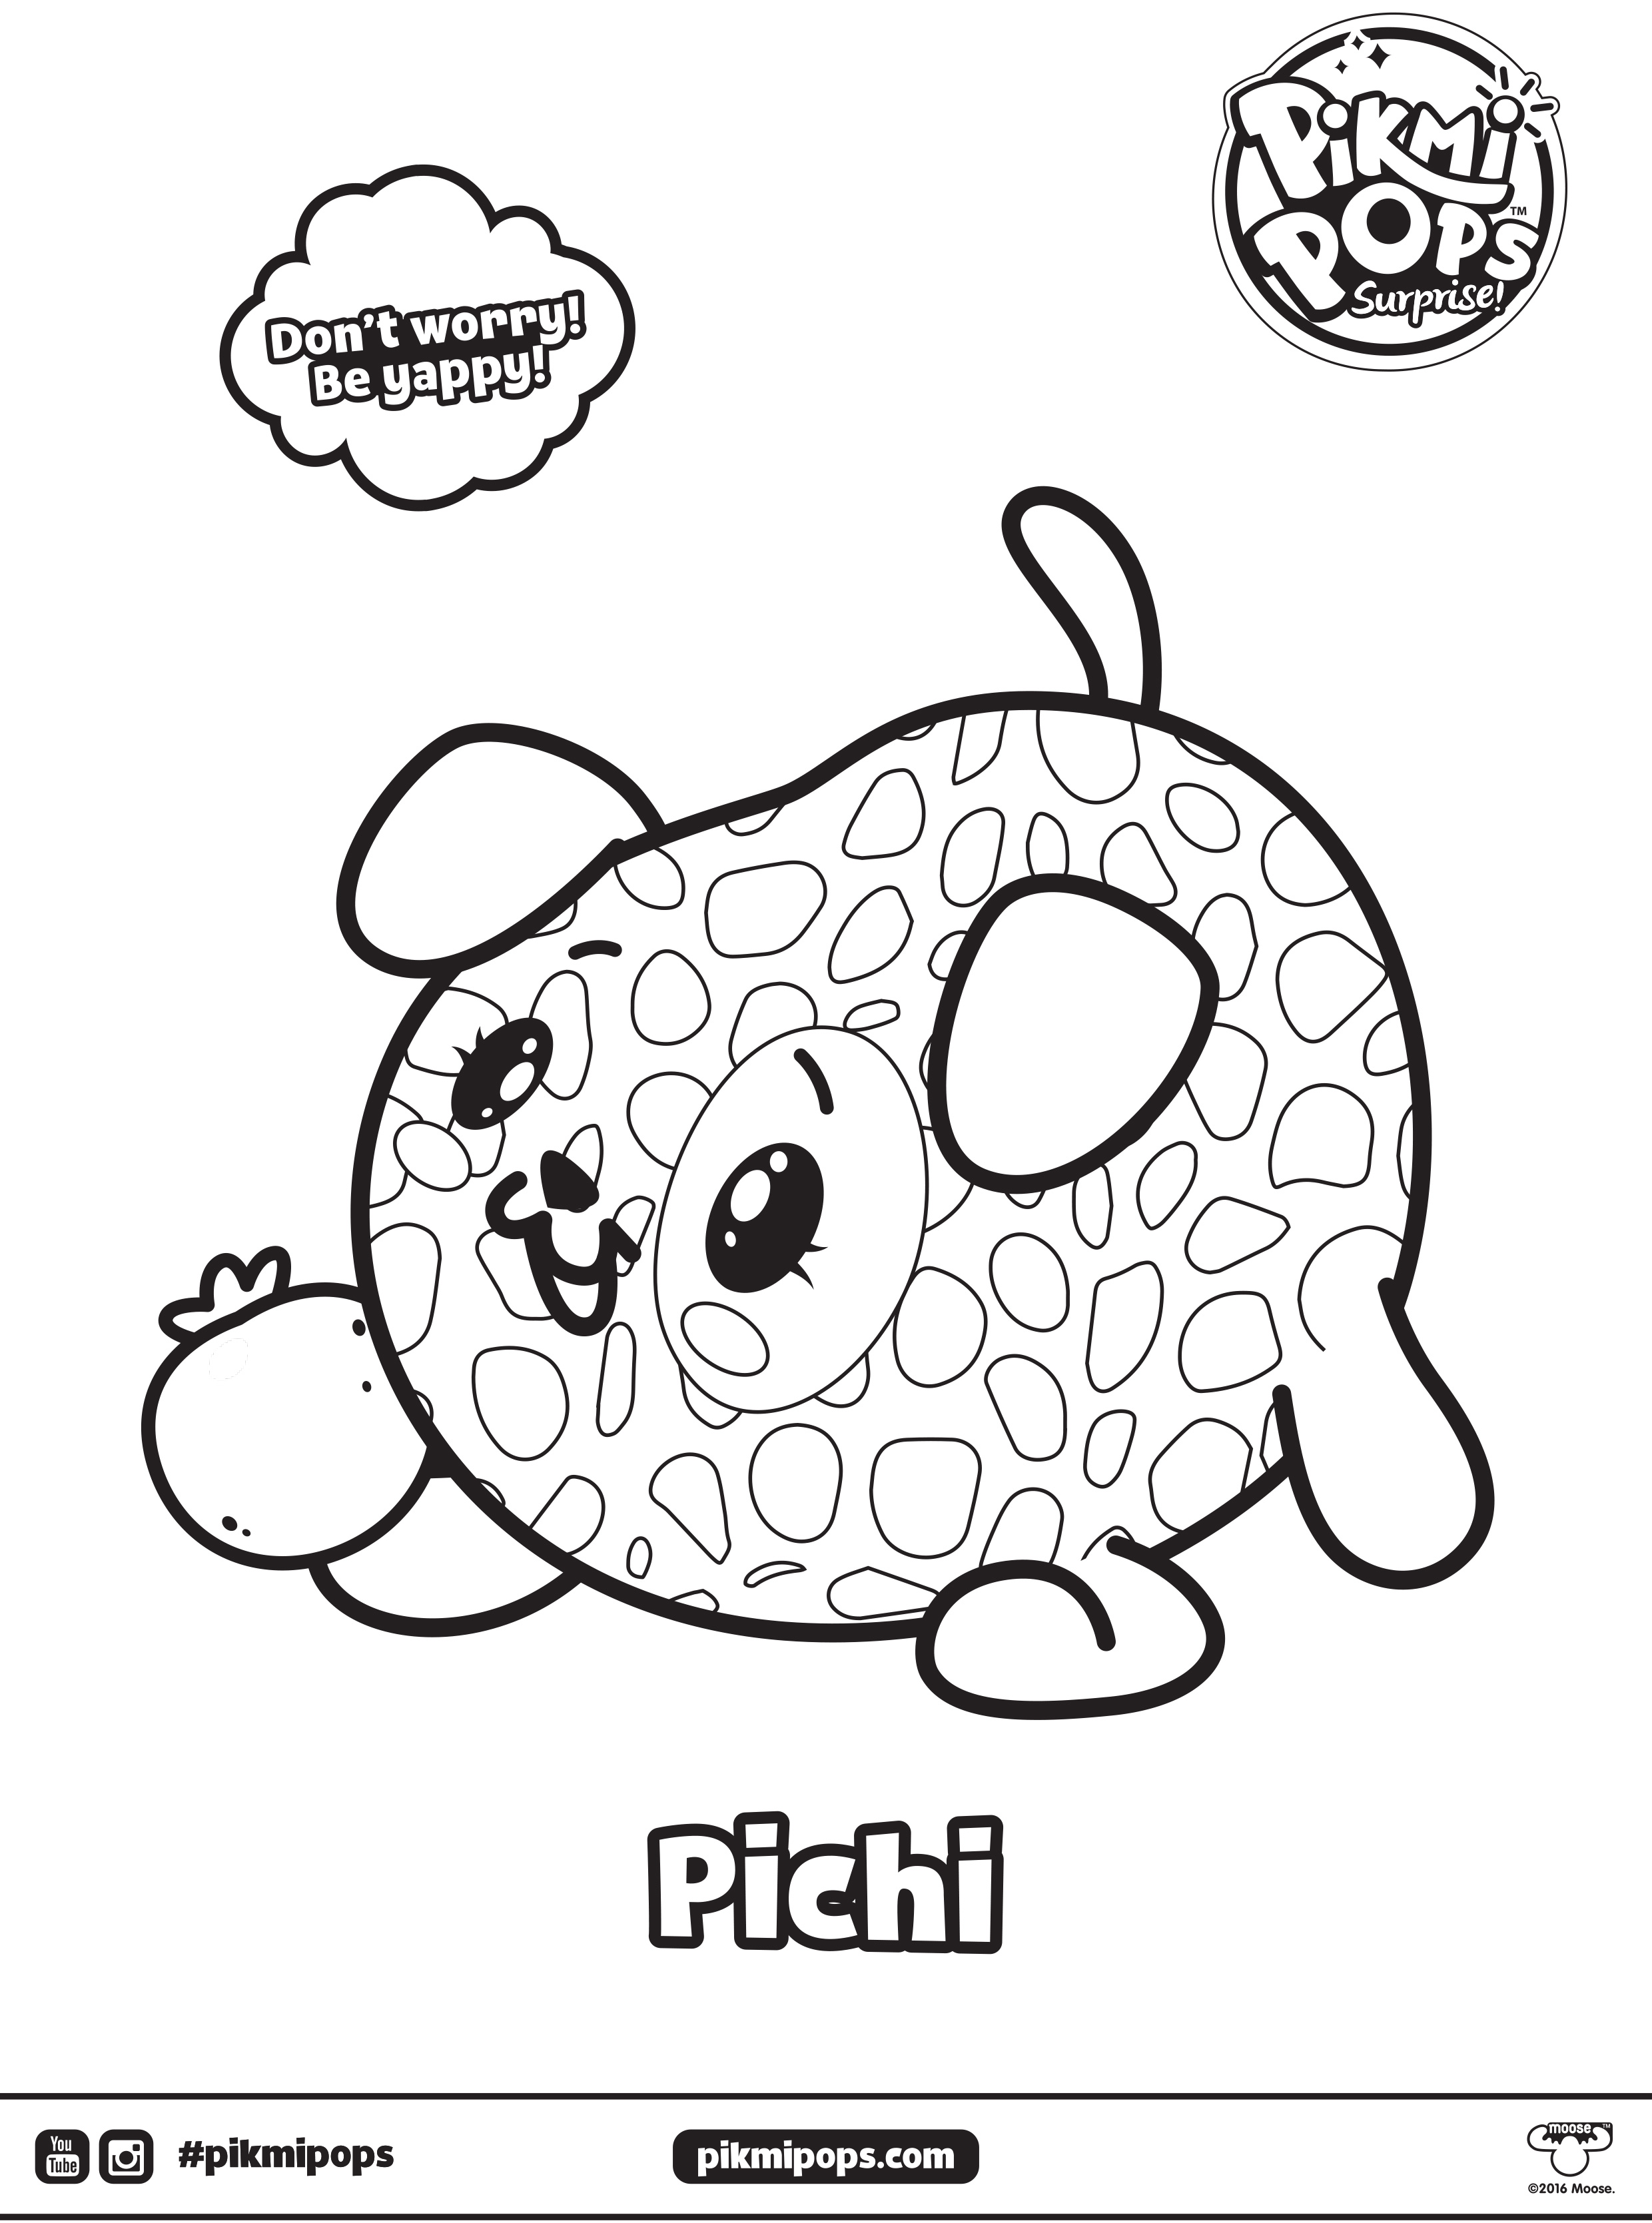 Download fun activities and color-ins to print out and play with Pikmi